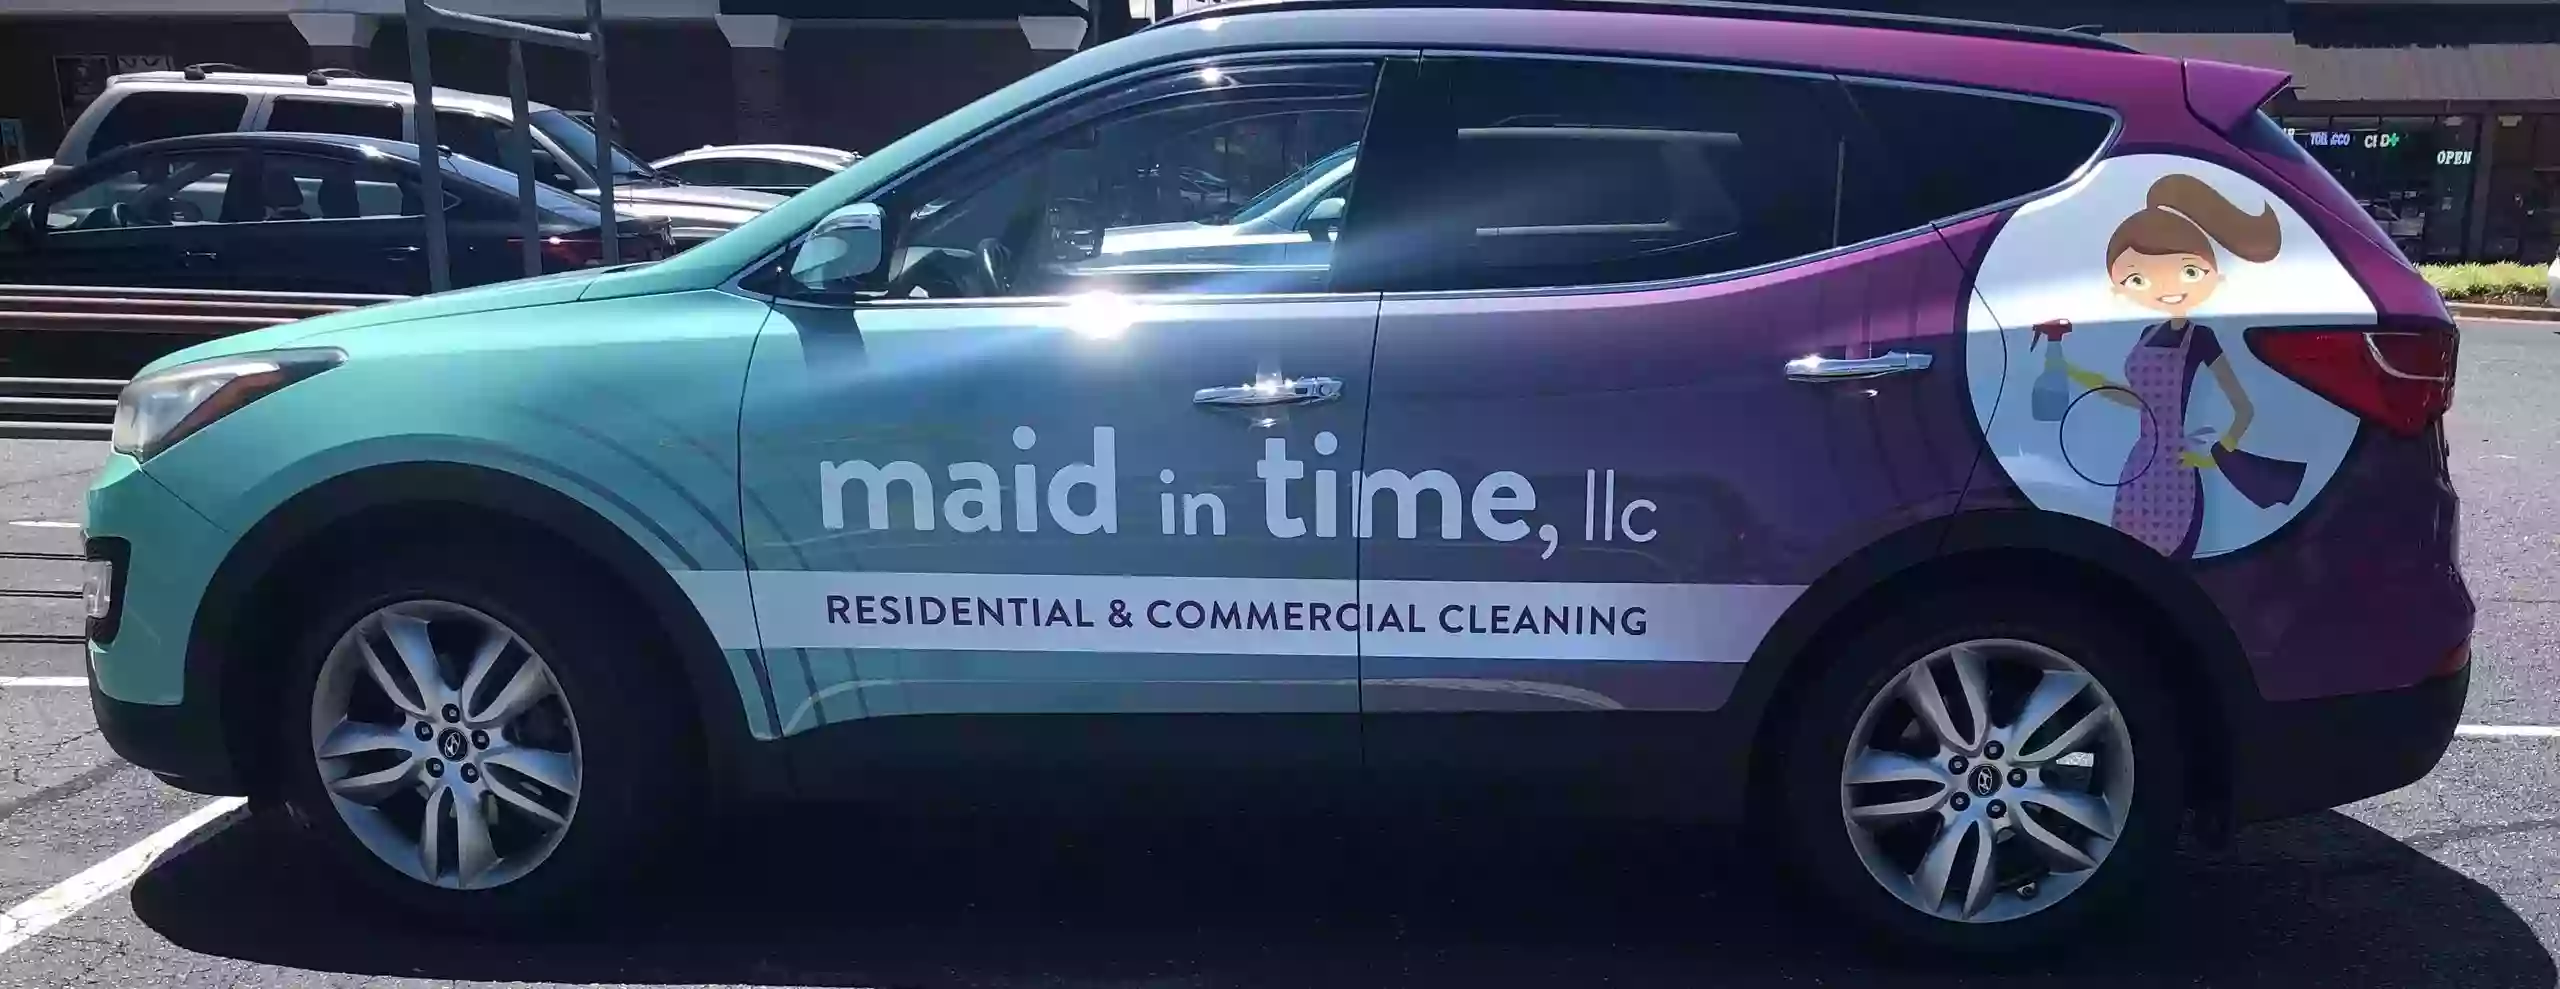 Maid in Time llc.